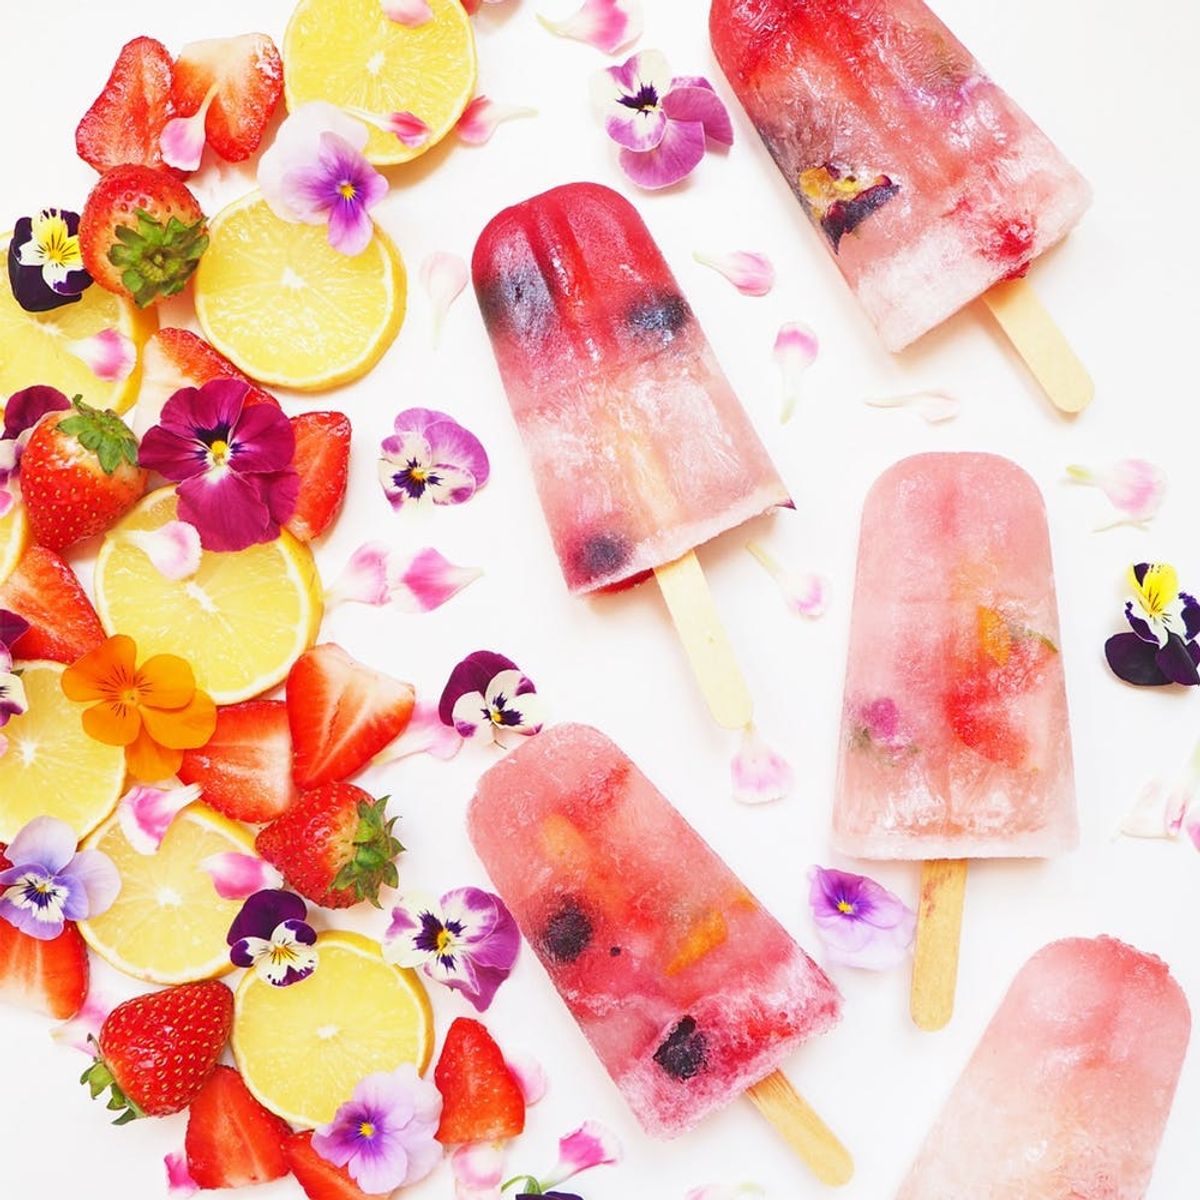 Your Next Event Will Be Poppin’ With These Fruity Champagne Popsicles